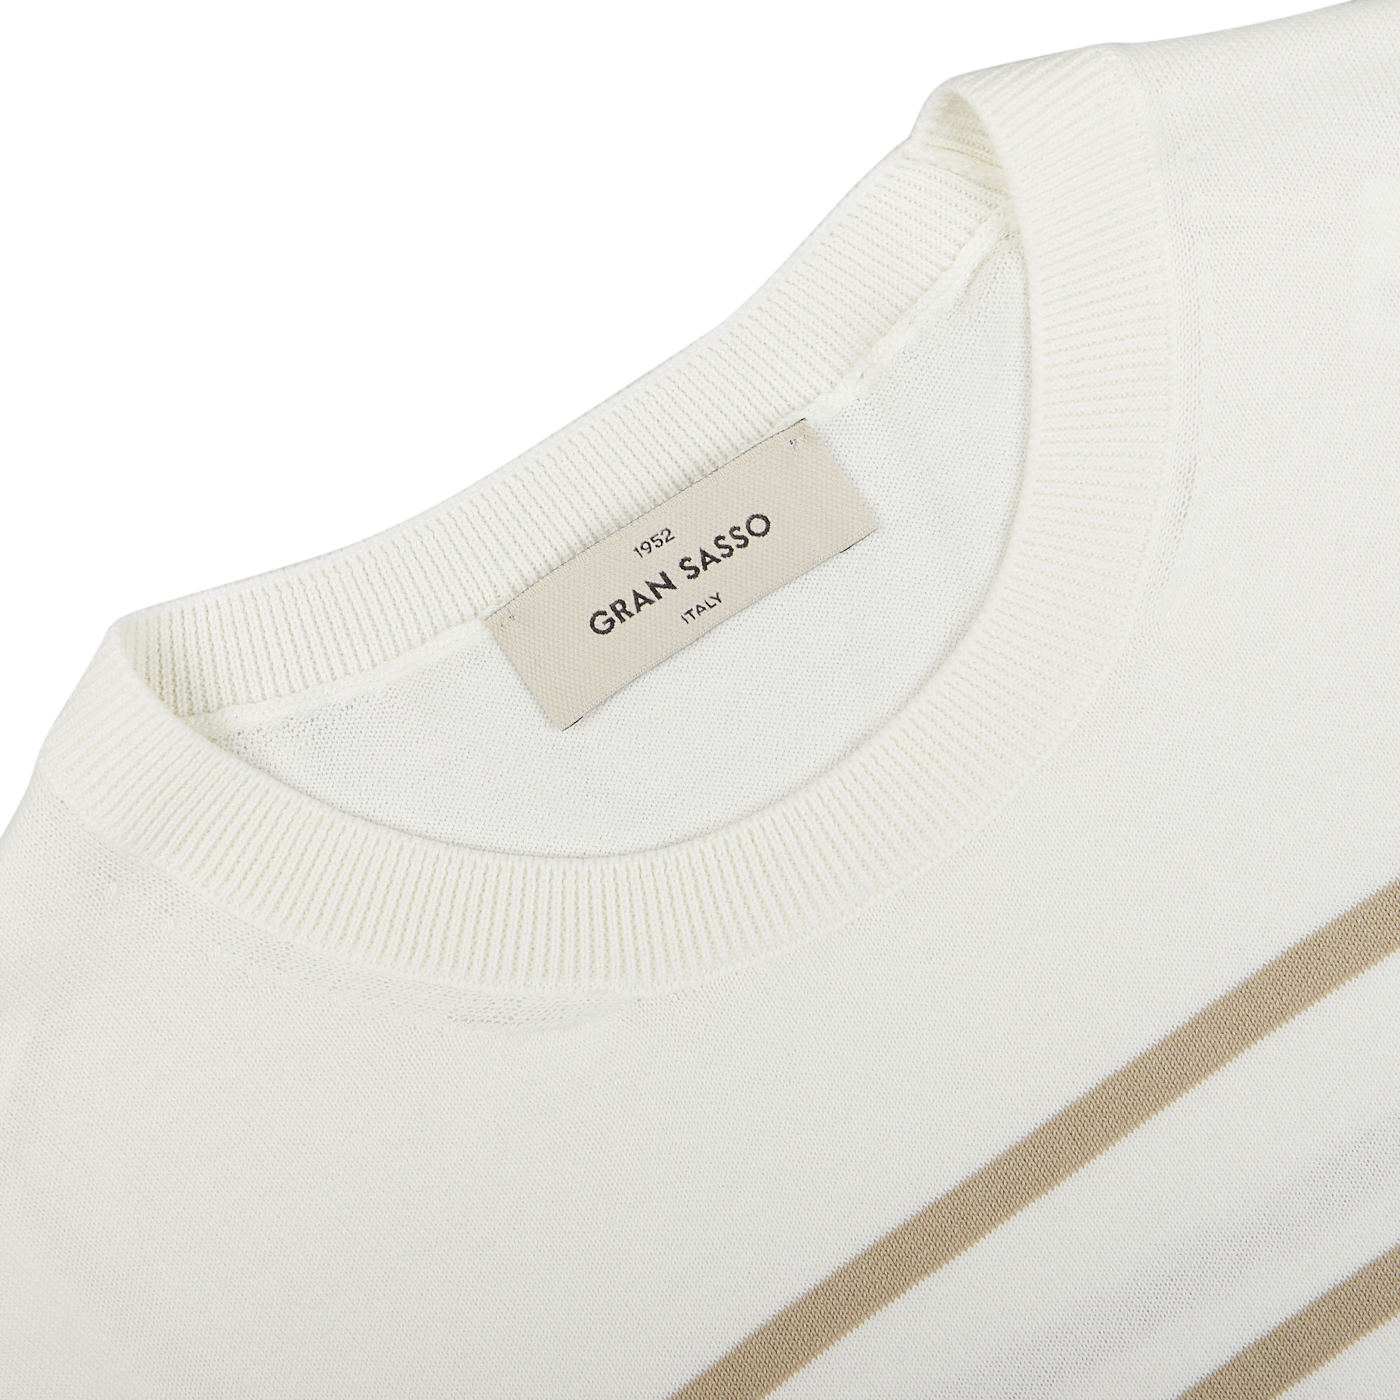 Close-up of a cream beige striped organic cotton t-shirt with a Gran Sasso neck label displaying the brand "gran sasso" and size "xxl".